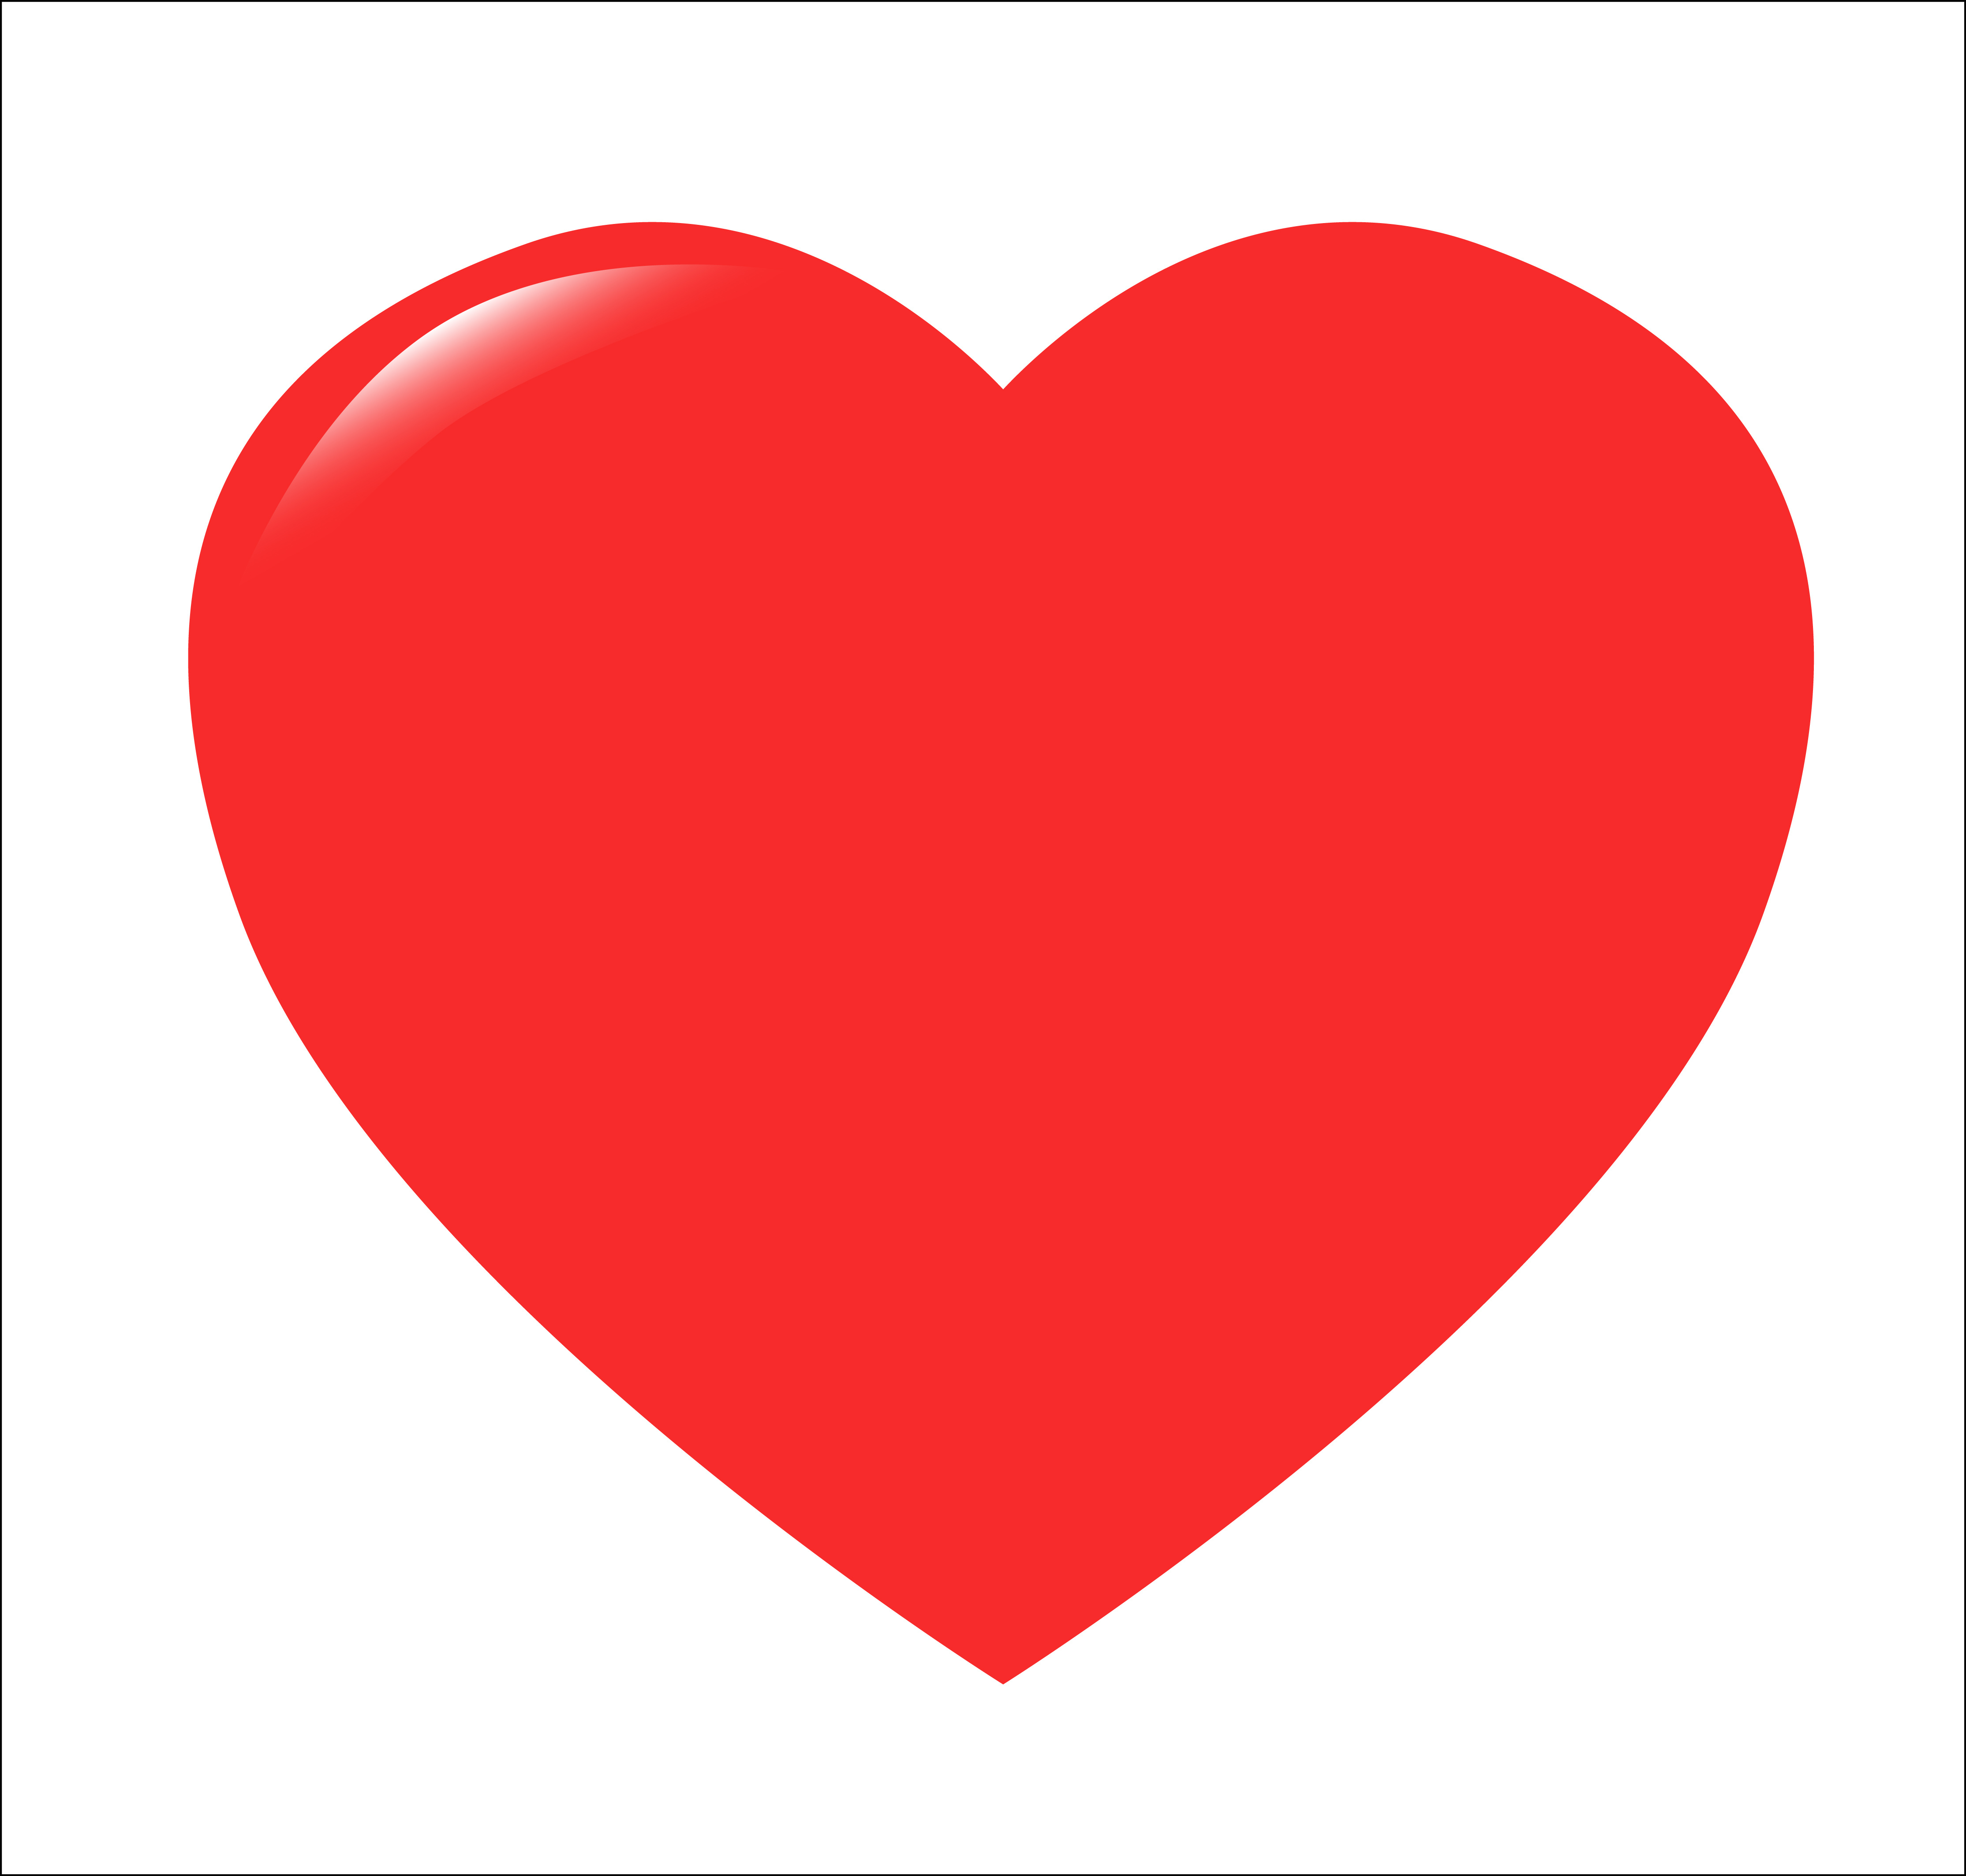 Free Red Heart, Download Free Clip Art, Free Clip Art on